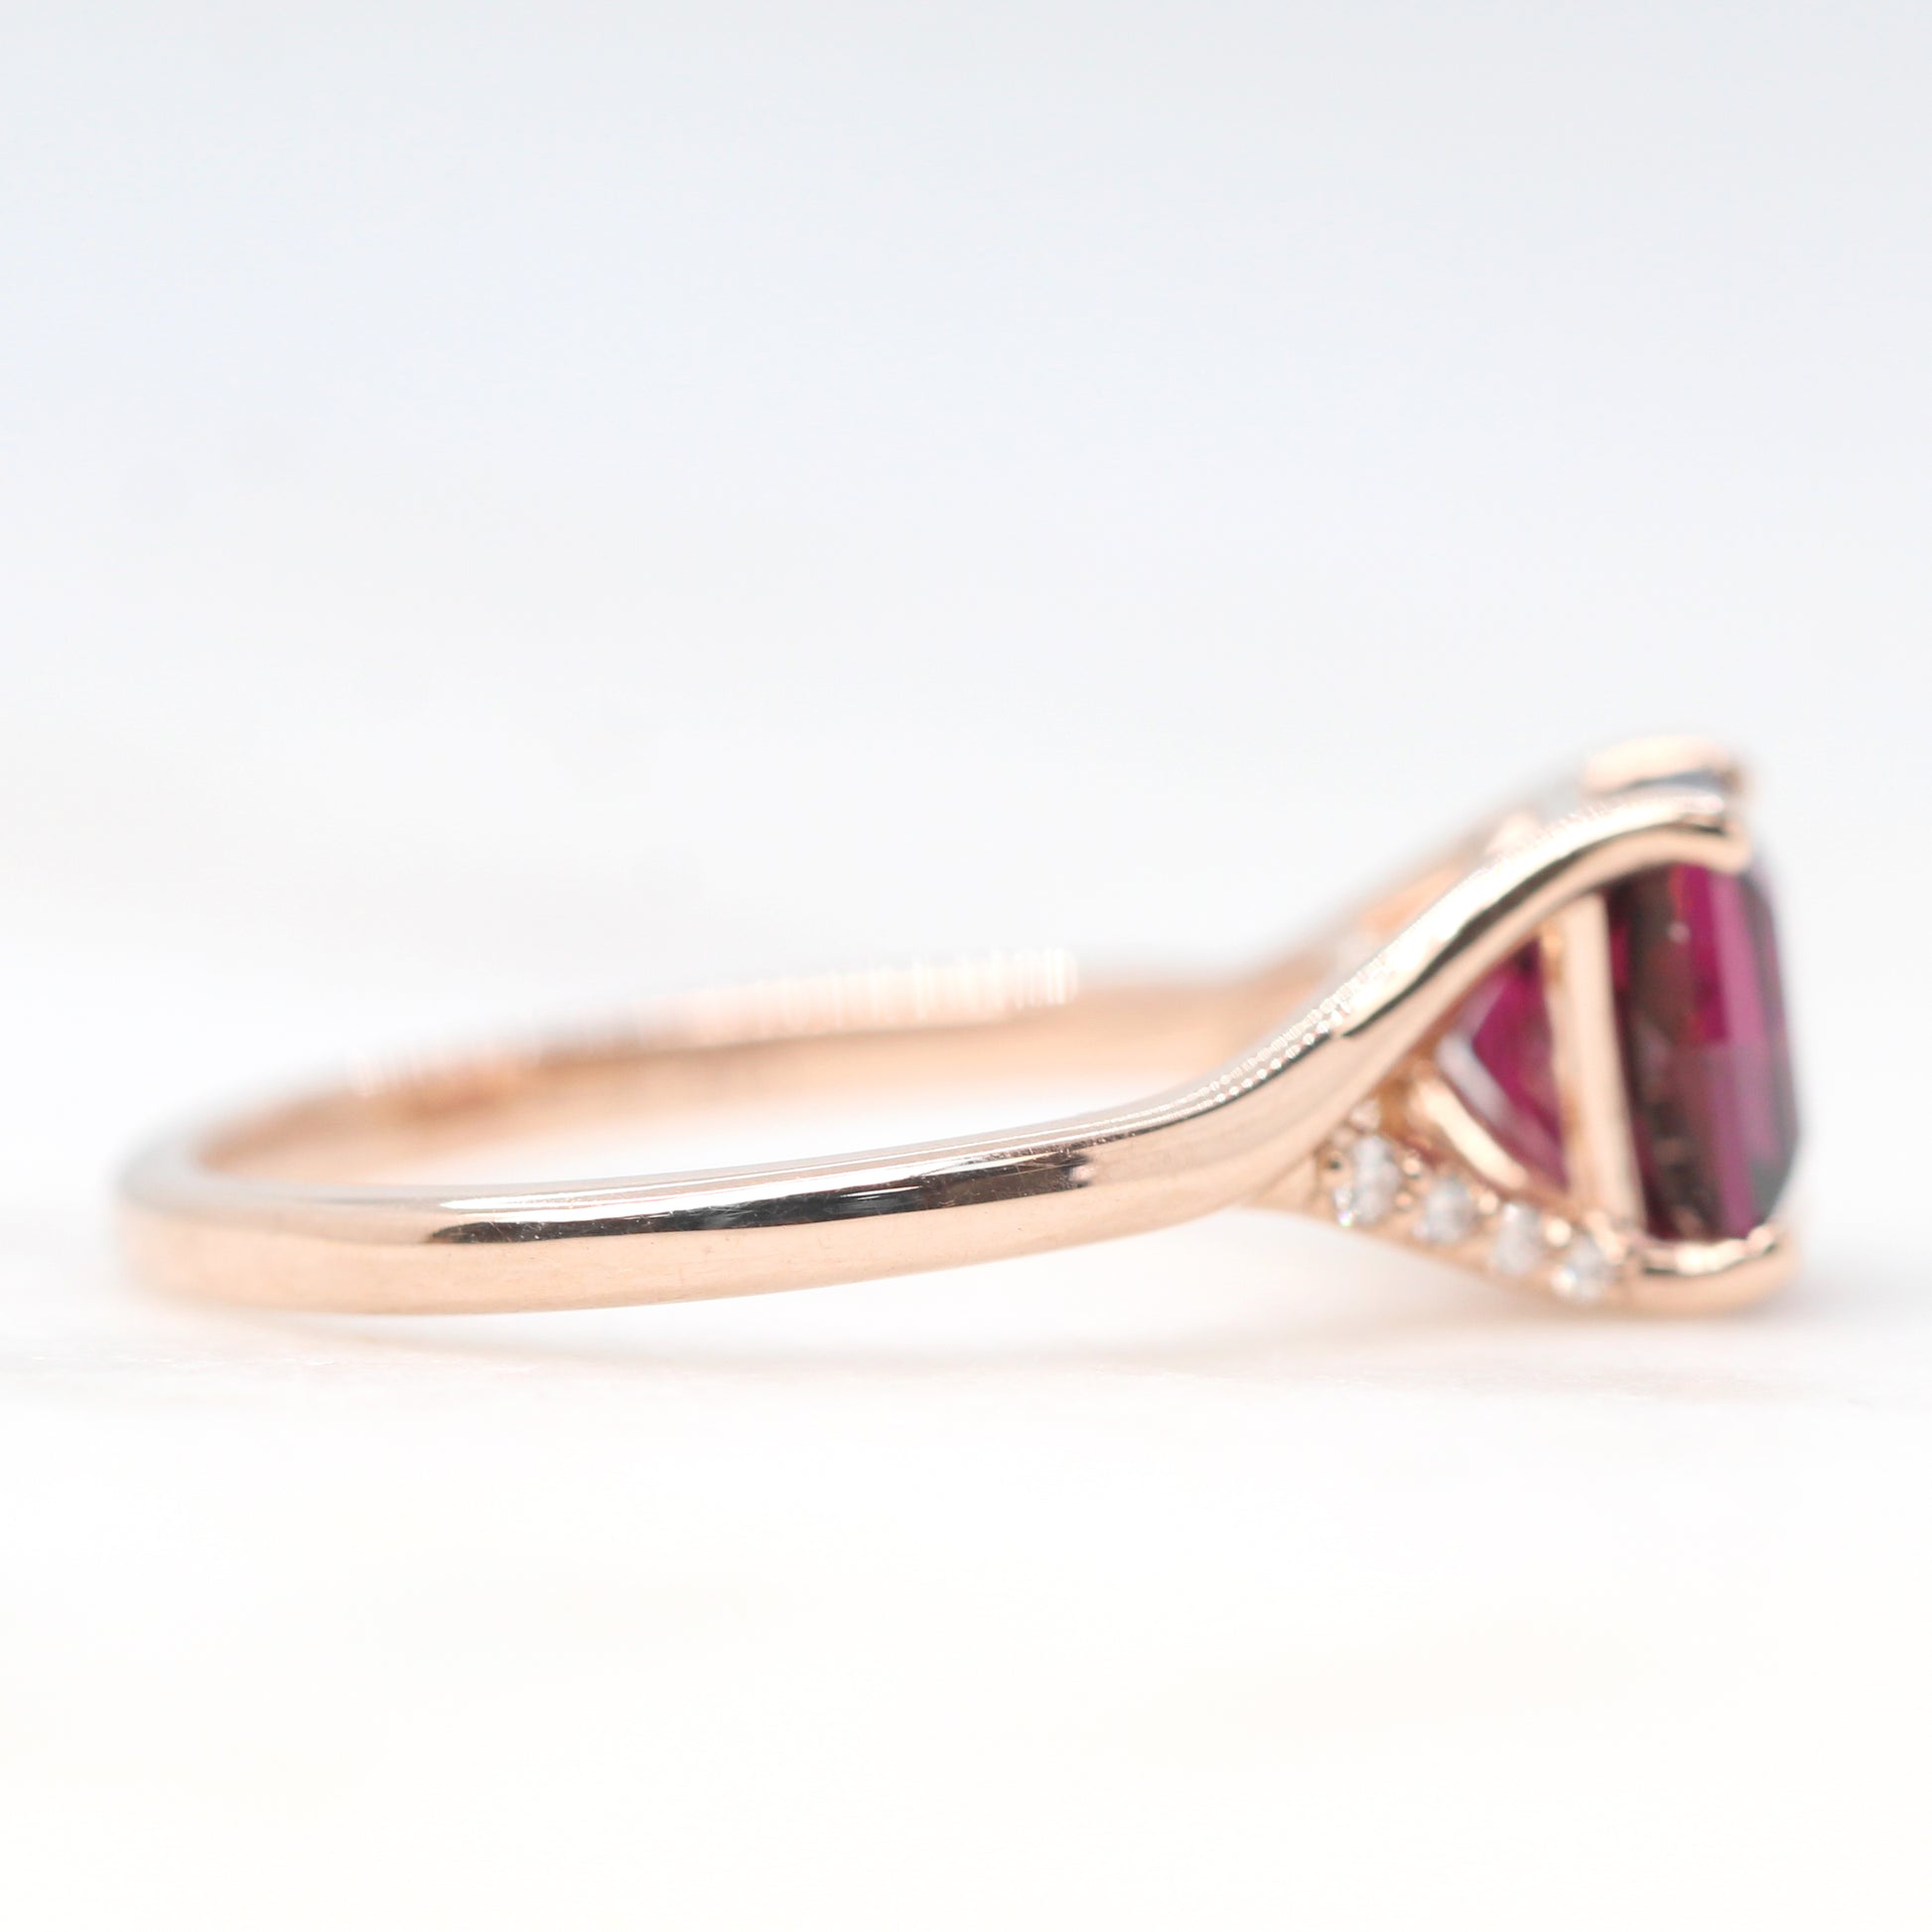 Kennedy Ring with a 2.23 Carat Geometric Fancy Cushion Cut Rhodolite Garnet and White Accent Diamonds in 14k Rose Gold - Ready to Size and Ship - Midwinter Co. Alternative Bridal Rings and Modern Fine Jewelry